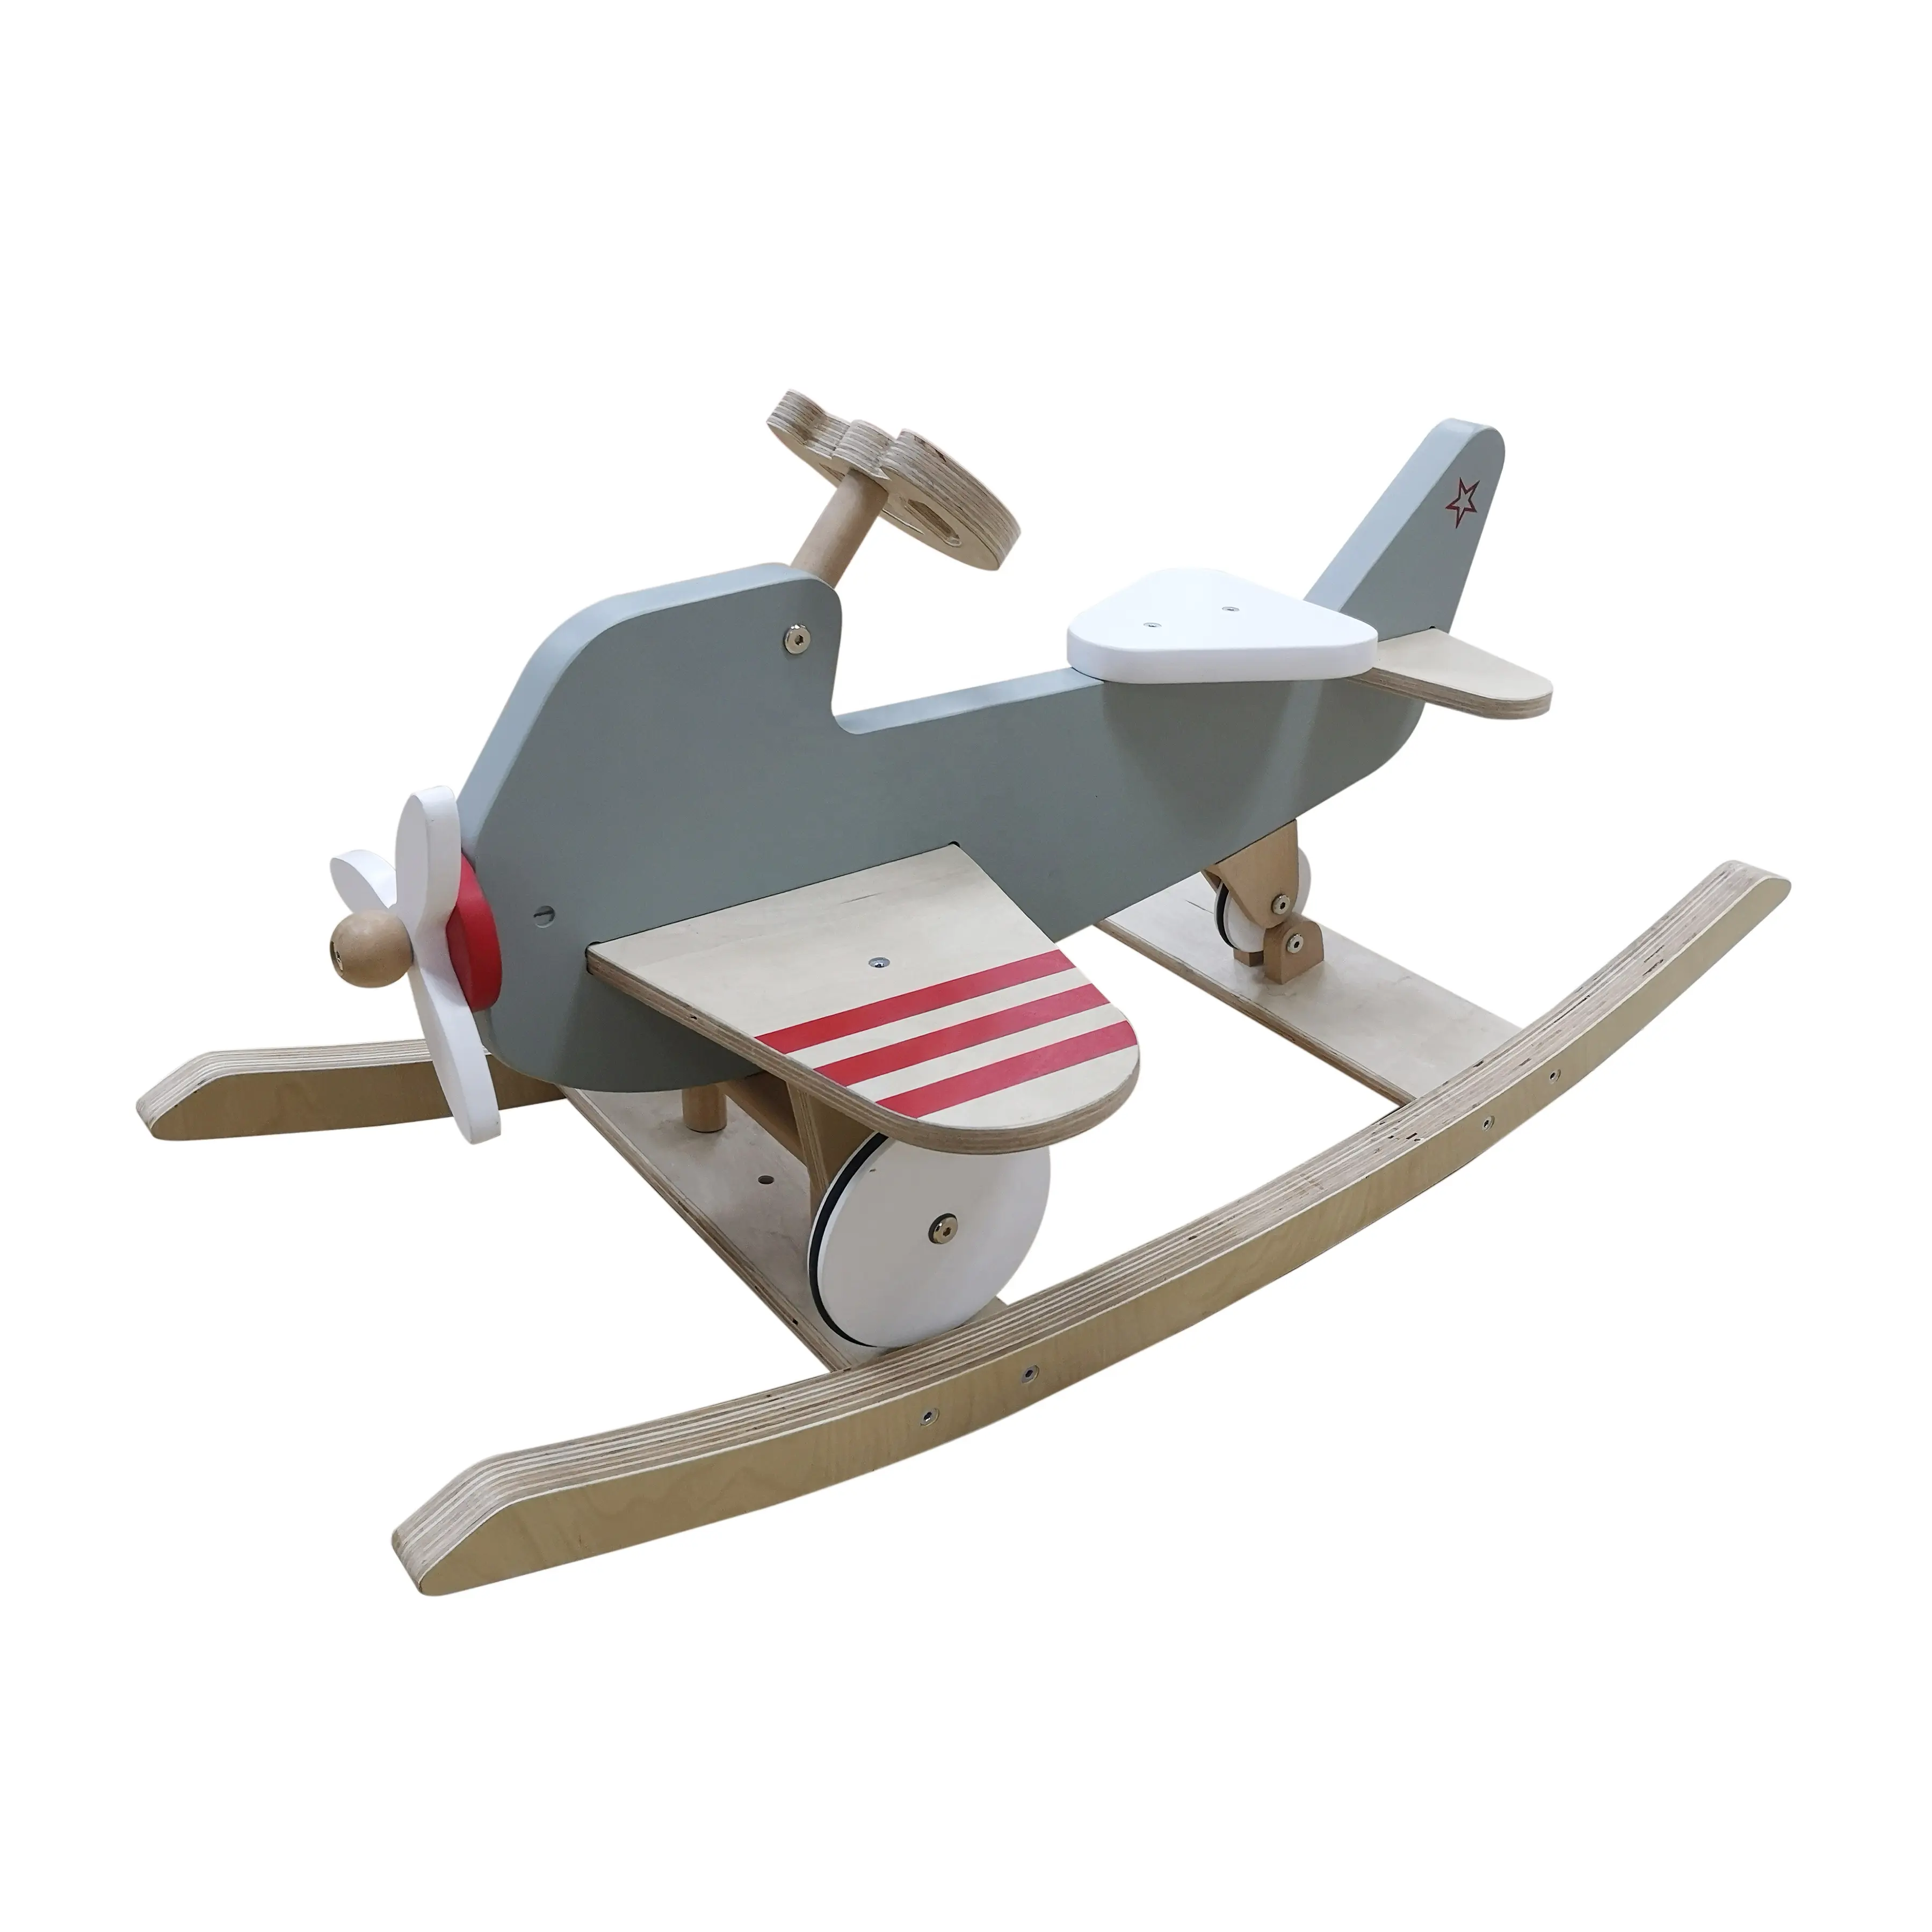 Asweets Rocking Chair Wooden Rocker Rid On Toys Wooden Airplane Horse Riding For Children Kids